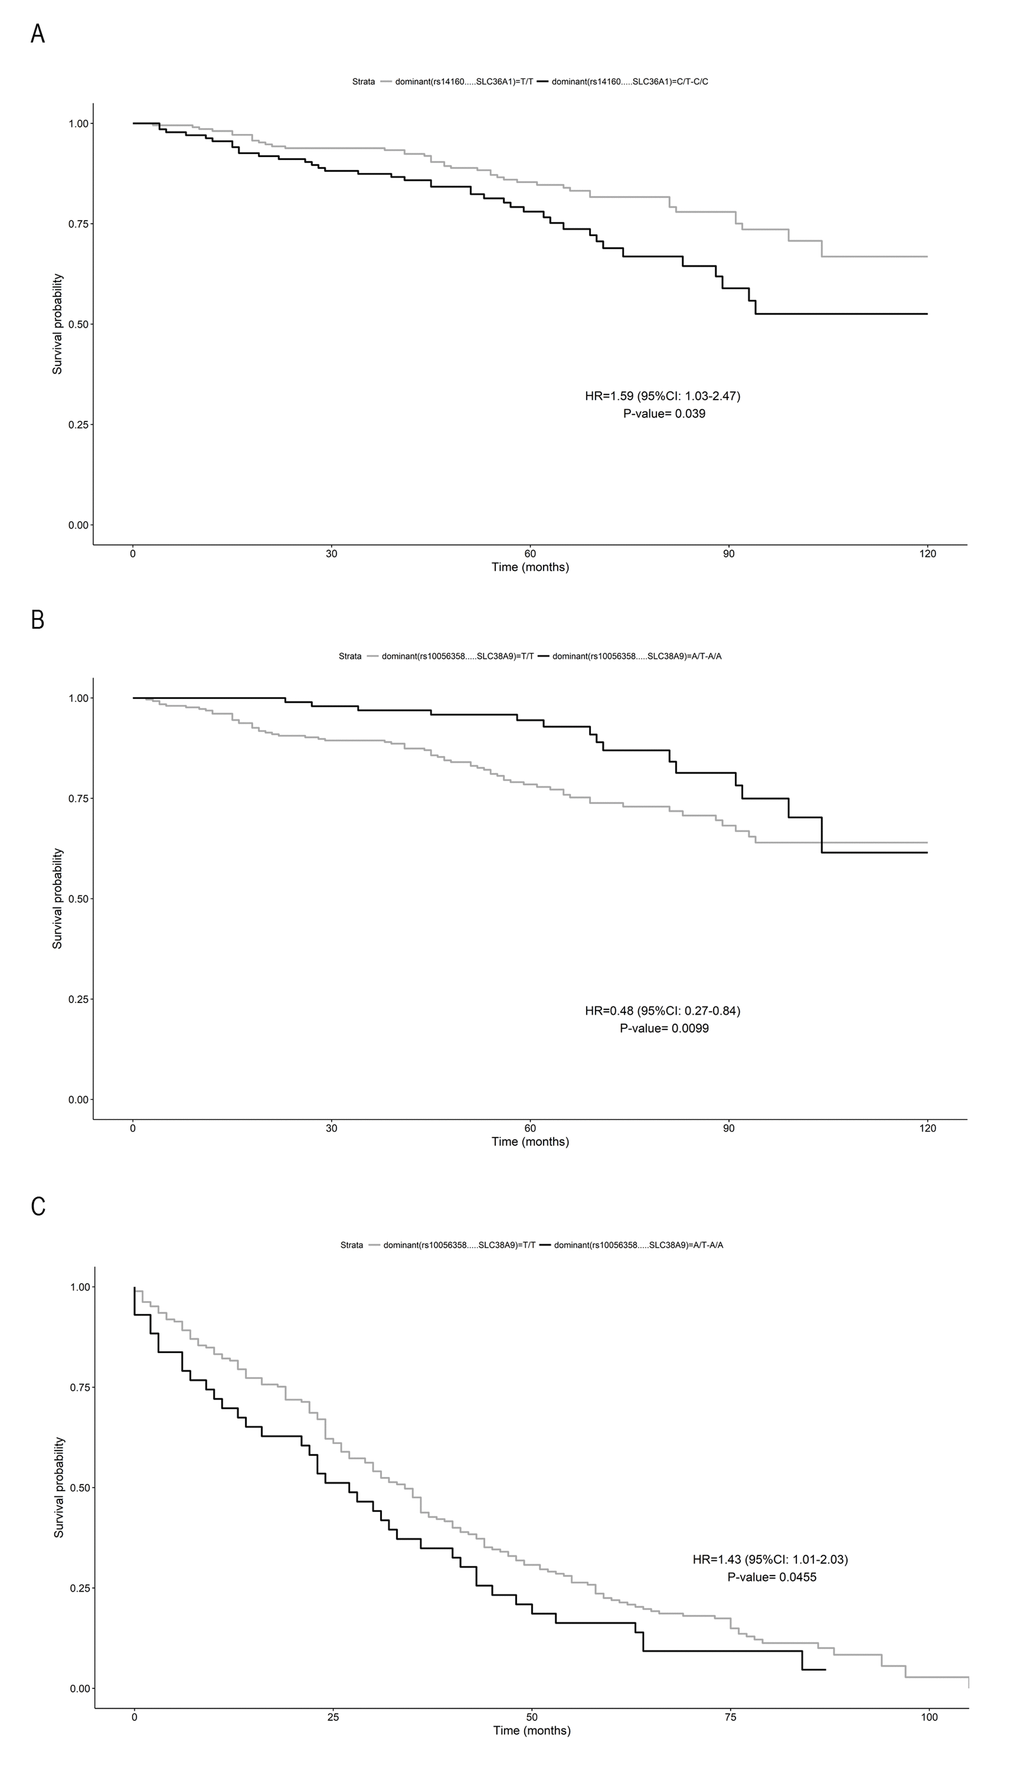 Survival function of carriers of minor allele (black) vs non carriers (grey). (A) rs14160 (SLC36A1) in subjects aged B) rs10056358 (SLC38A9) in subjects aged ≥90 years; (C) rs10056358 (SLC38A9) in subjects aged > 90 years. Time is expressed in months, where 0 is considered the time of recruitment, and each individual is followed up for survival status till death. HR value, confidence interval and p-value from Cox regression analysis are reported inside the figure.